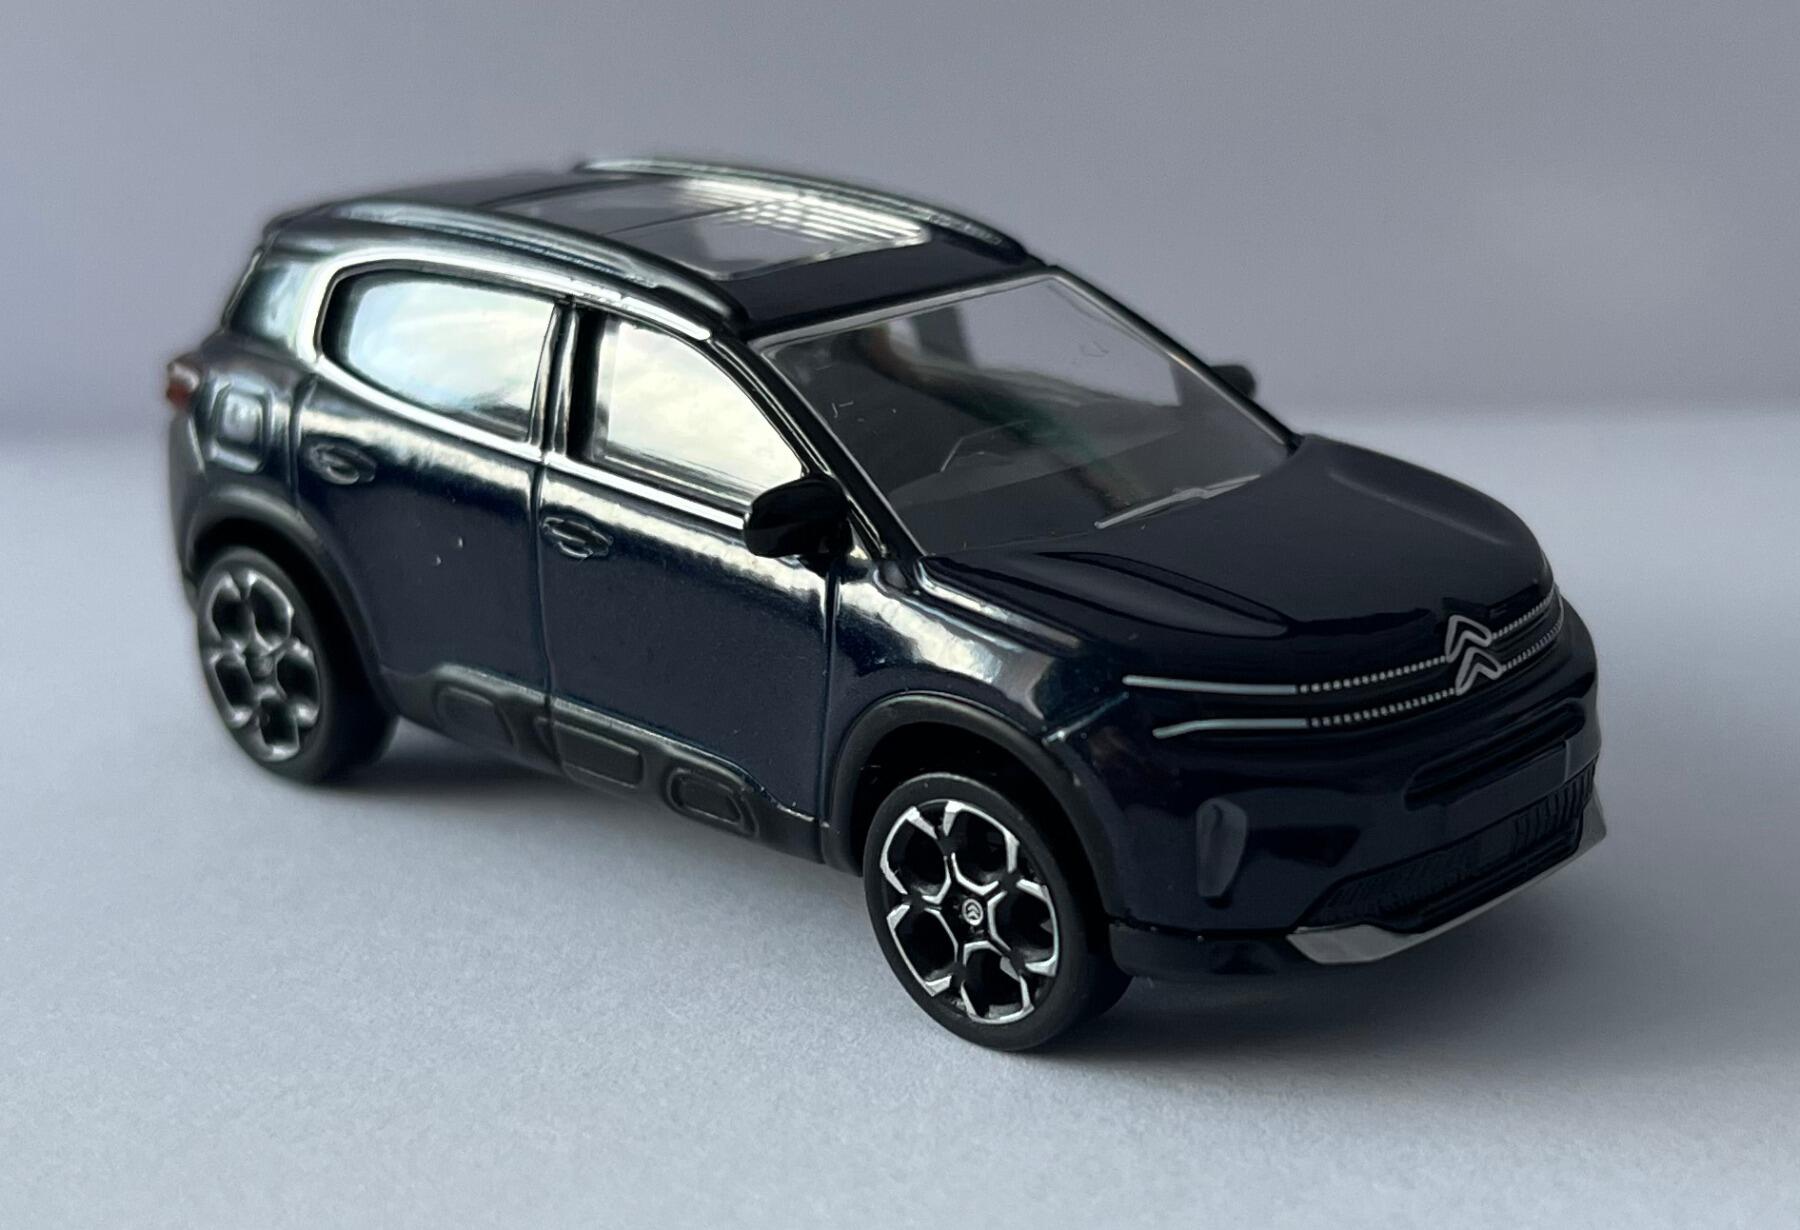 Citroen C5 Aircross 2022 in eclipse blue, 1:64 scale diecast car model from  Norev, 310950